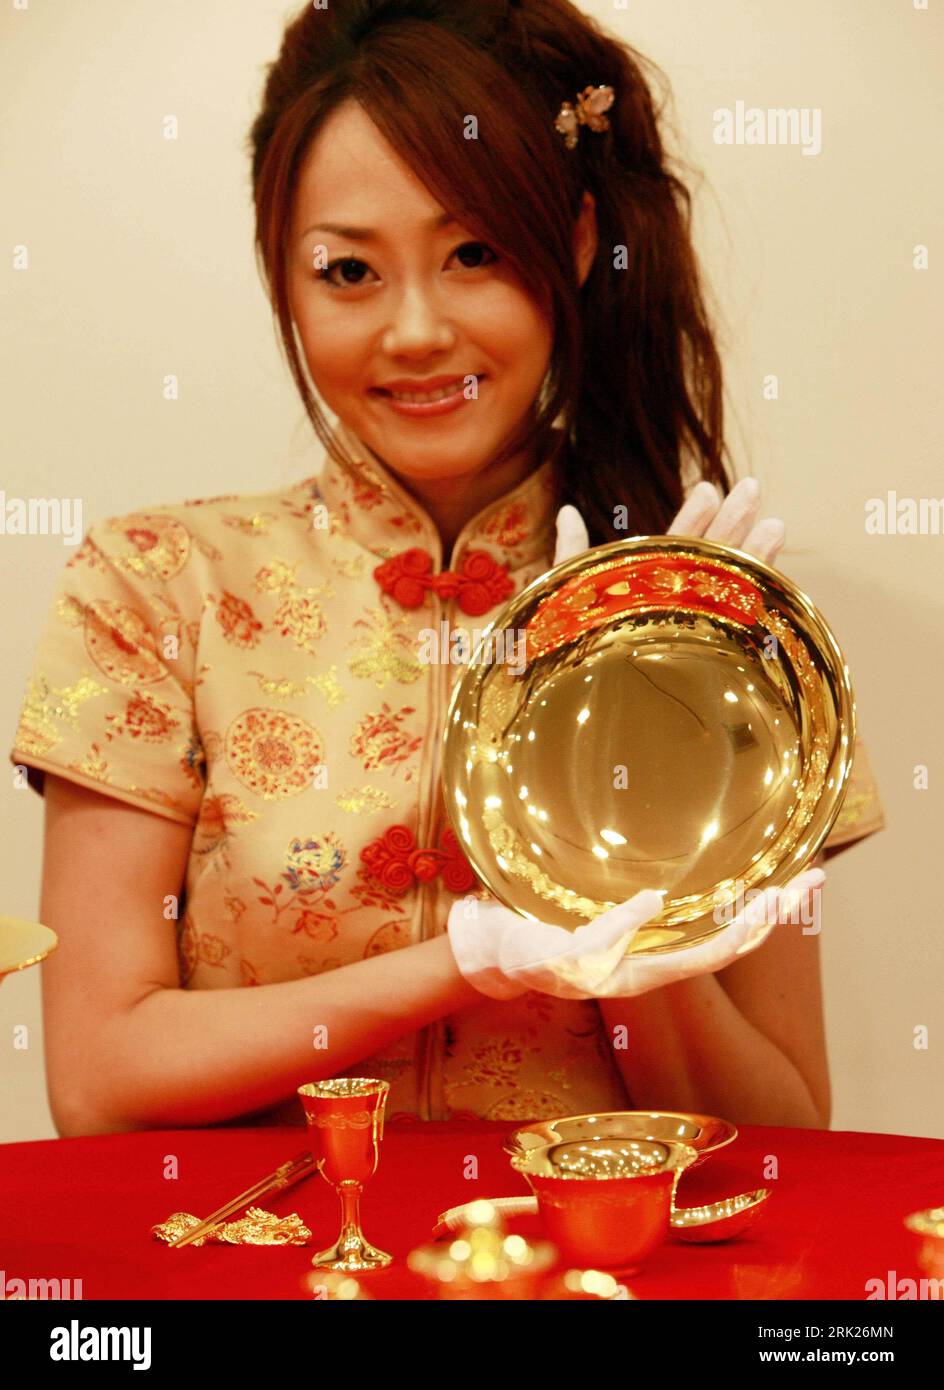 Bildnummer: 53151705  Datum: 02.09.2008  Copyright: imago/Xinhua  A staff member of Ginza Tanaka shows one piece of 24K gold Chinese-style dishware set in Ginza, Tokyo, capital of Japan, Sept. 2, 2008. The set was released by Ginza Tanaka including 13 kinds, 31 pieces dishwares such as cups, plates, bowls and chopsticks on Tuesday kbdig  einer Personal Mitglied of Ginza der Set war released by Ginza Tanaka namentlich 13 kinds, 31 Stücke dishwares solchen als cups, plates, Schüsseln und Stäbchen auf Tuesday und Geschirr hoch    Bildnummer 53151705 Date 02 09 2008 Copyright Imago XINHUA a Staff Stock Photo